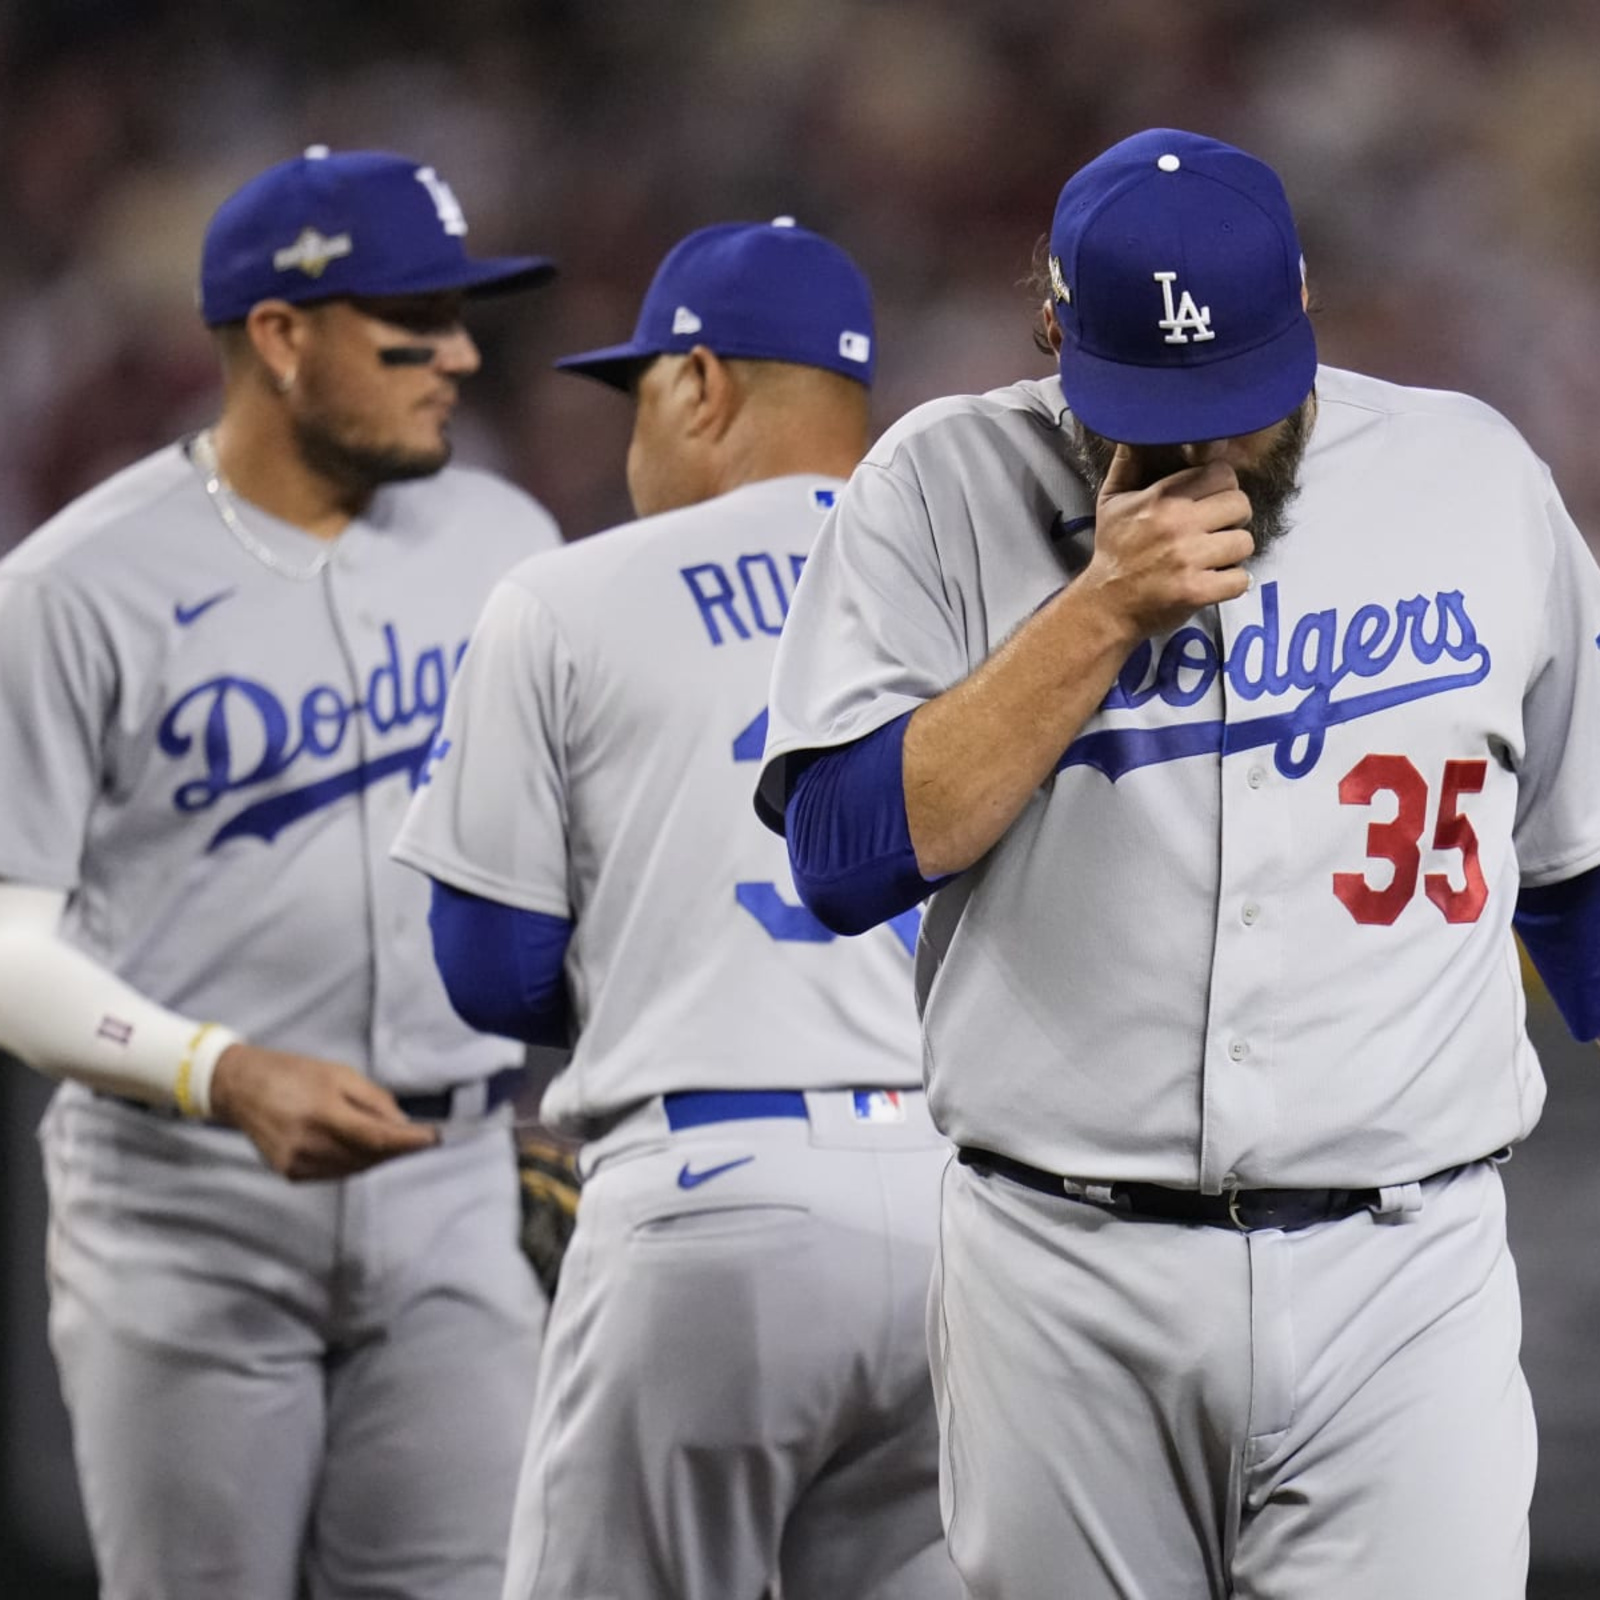 Dodgers: Austin Barnes' home run streak and what his future holds